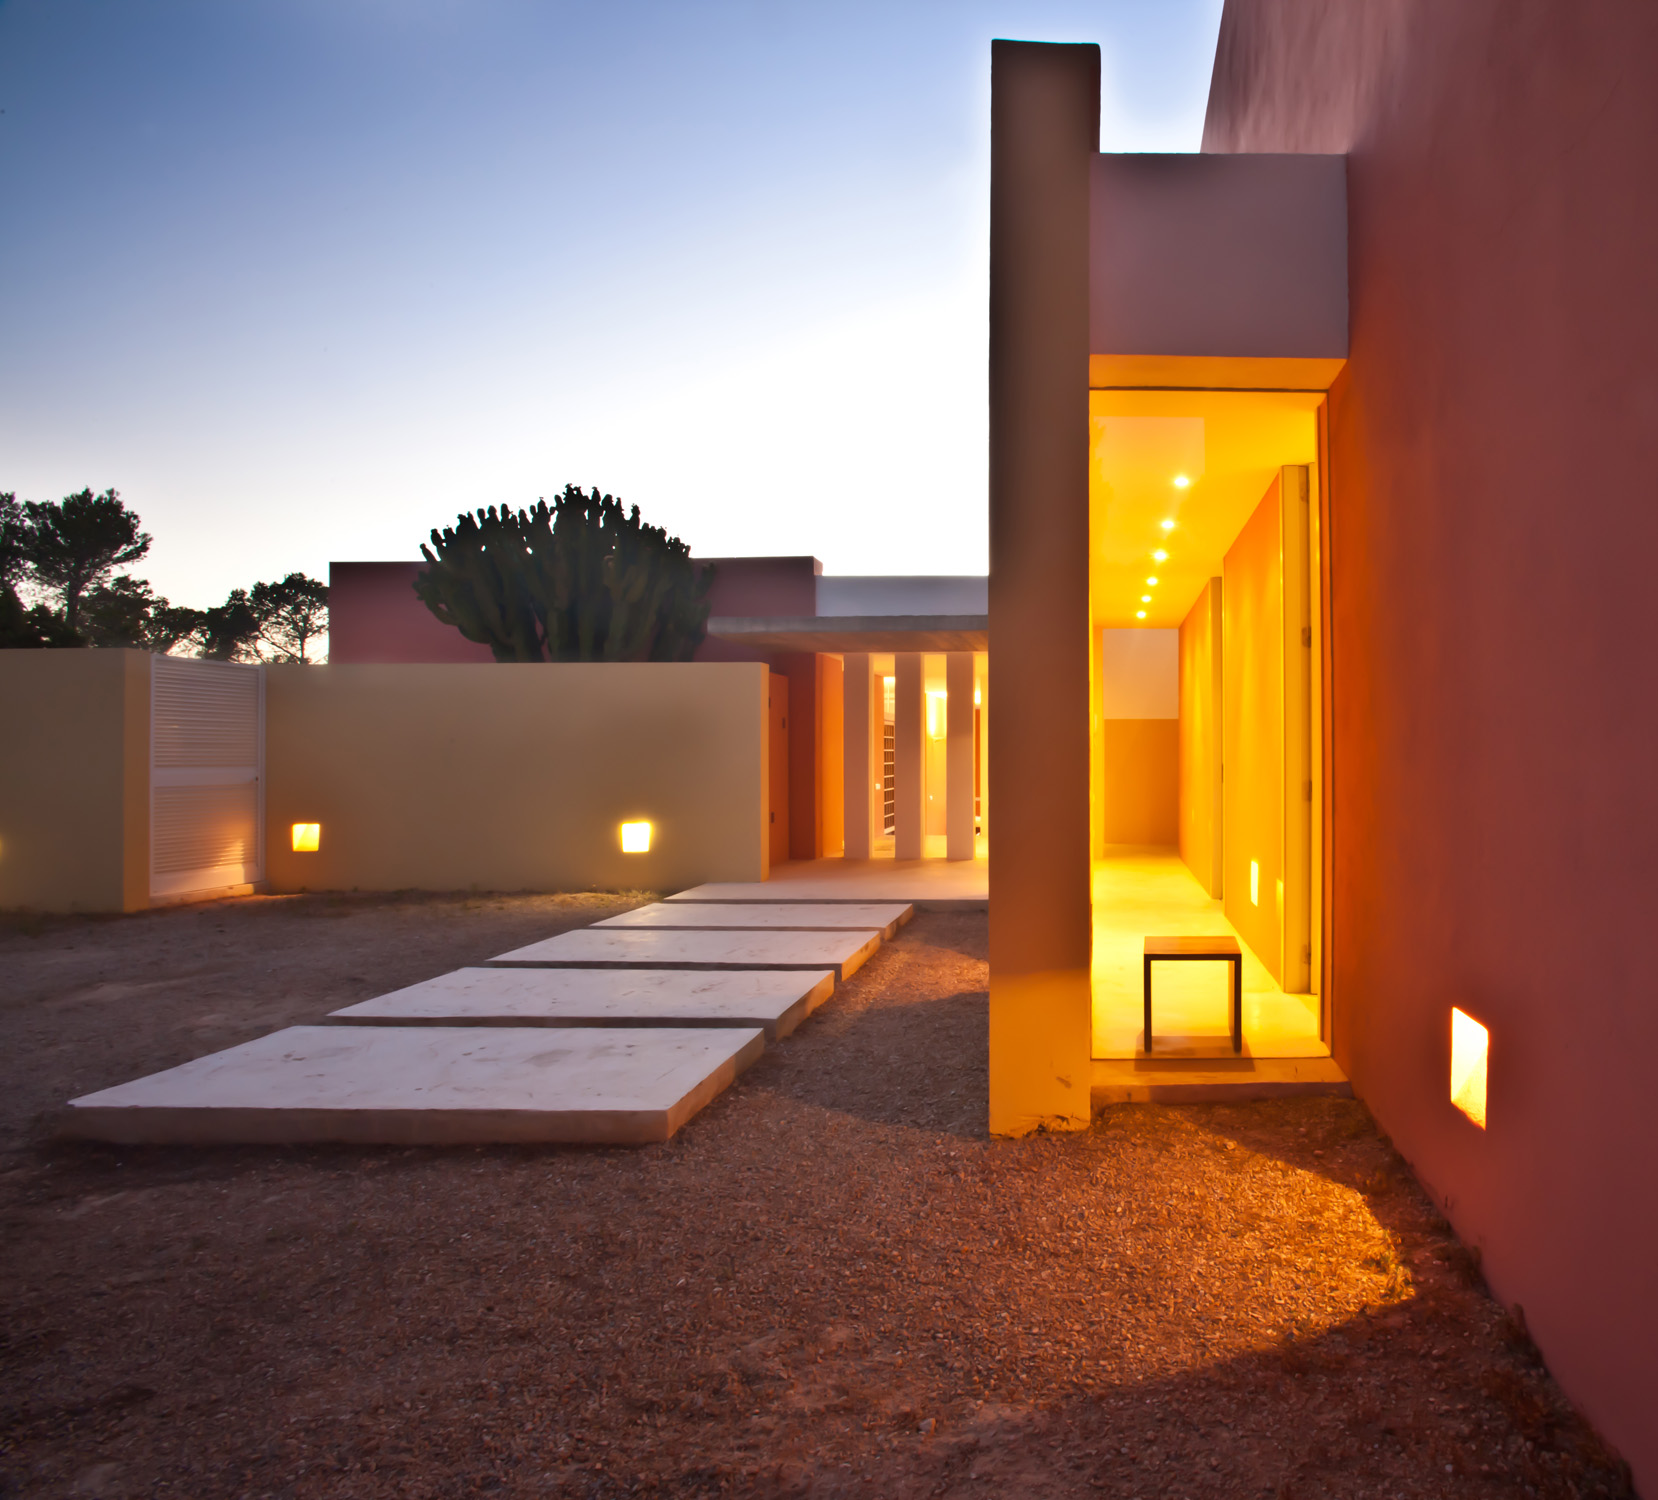 Exterior with evening lighting by Pep Torres - contemporary architecture and design studio in Ibiza